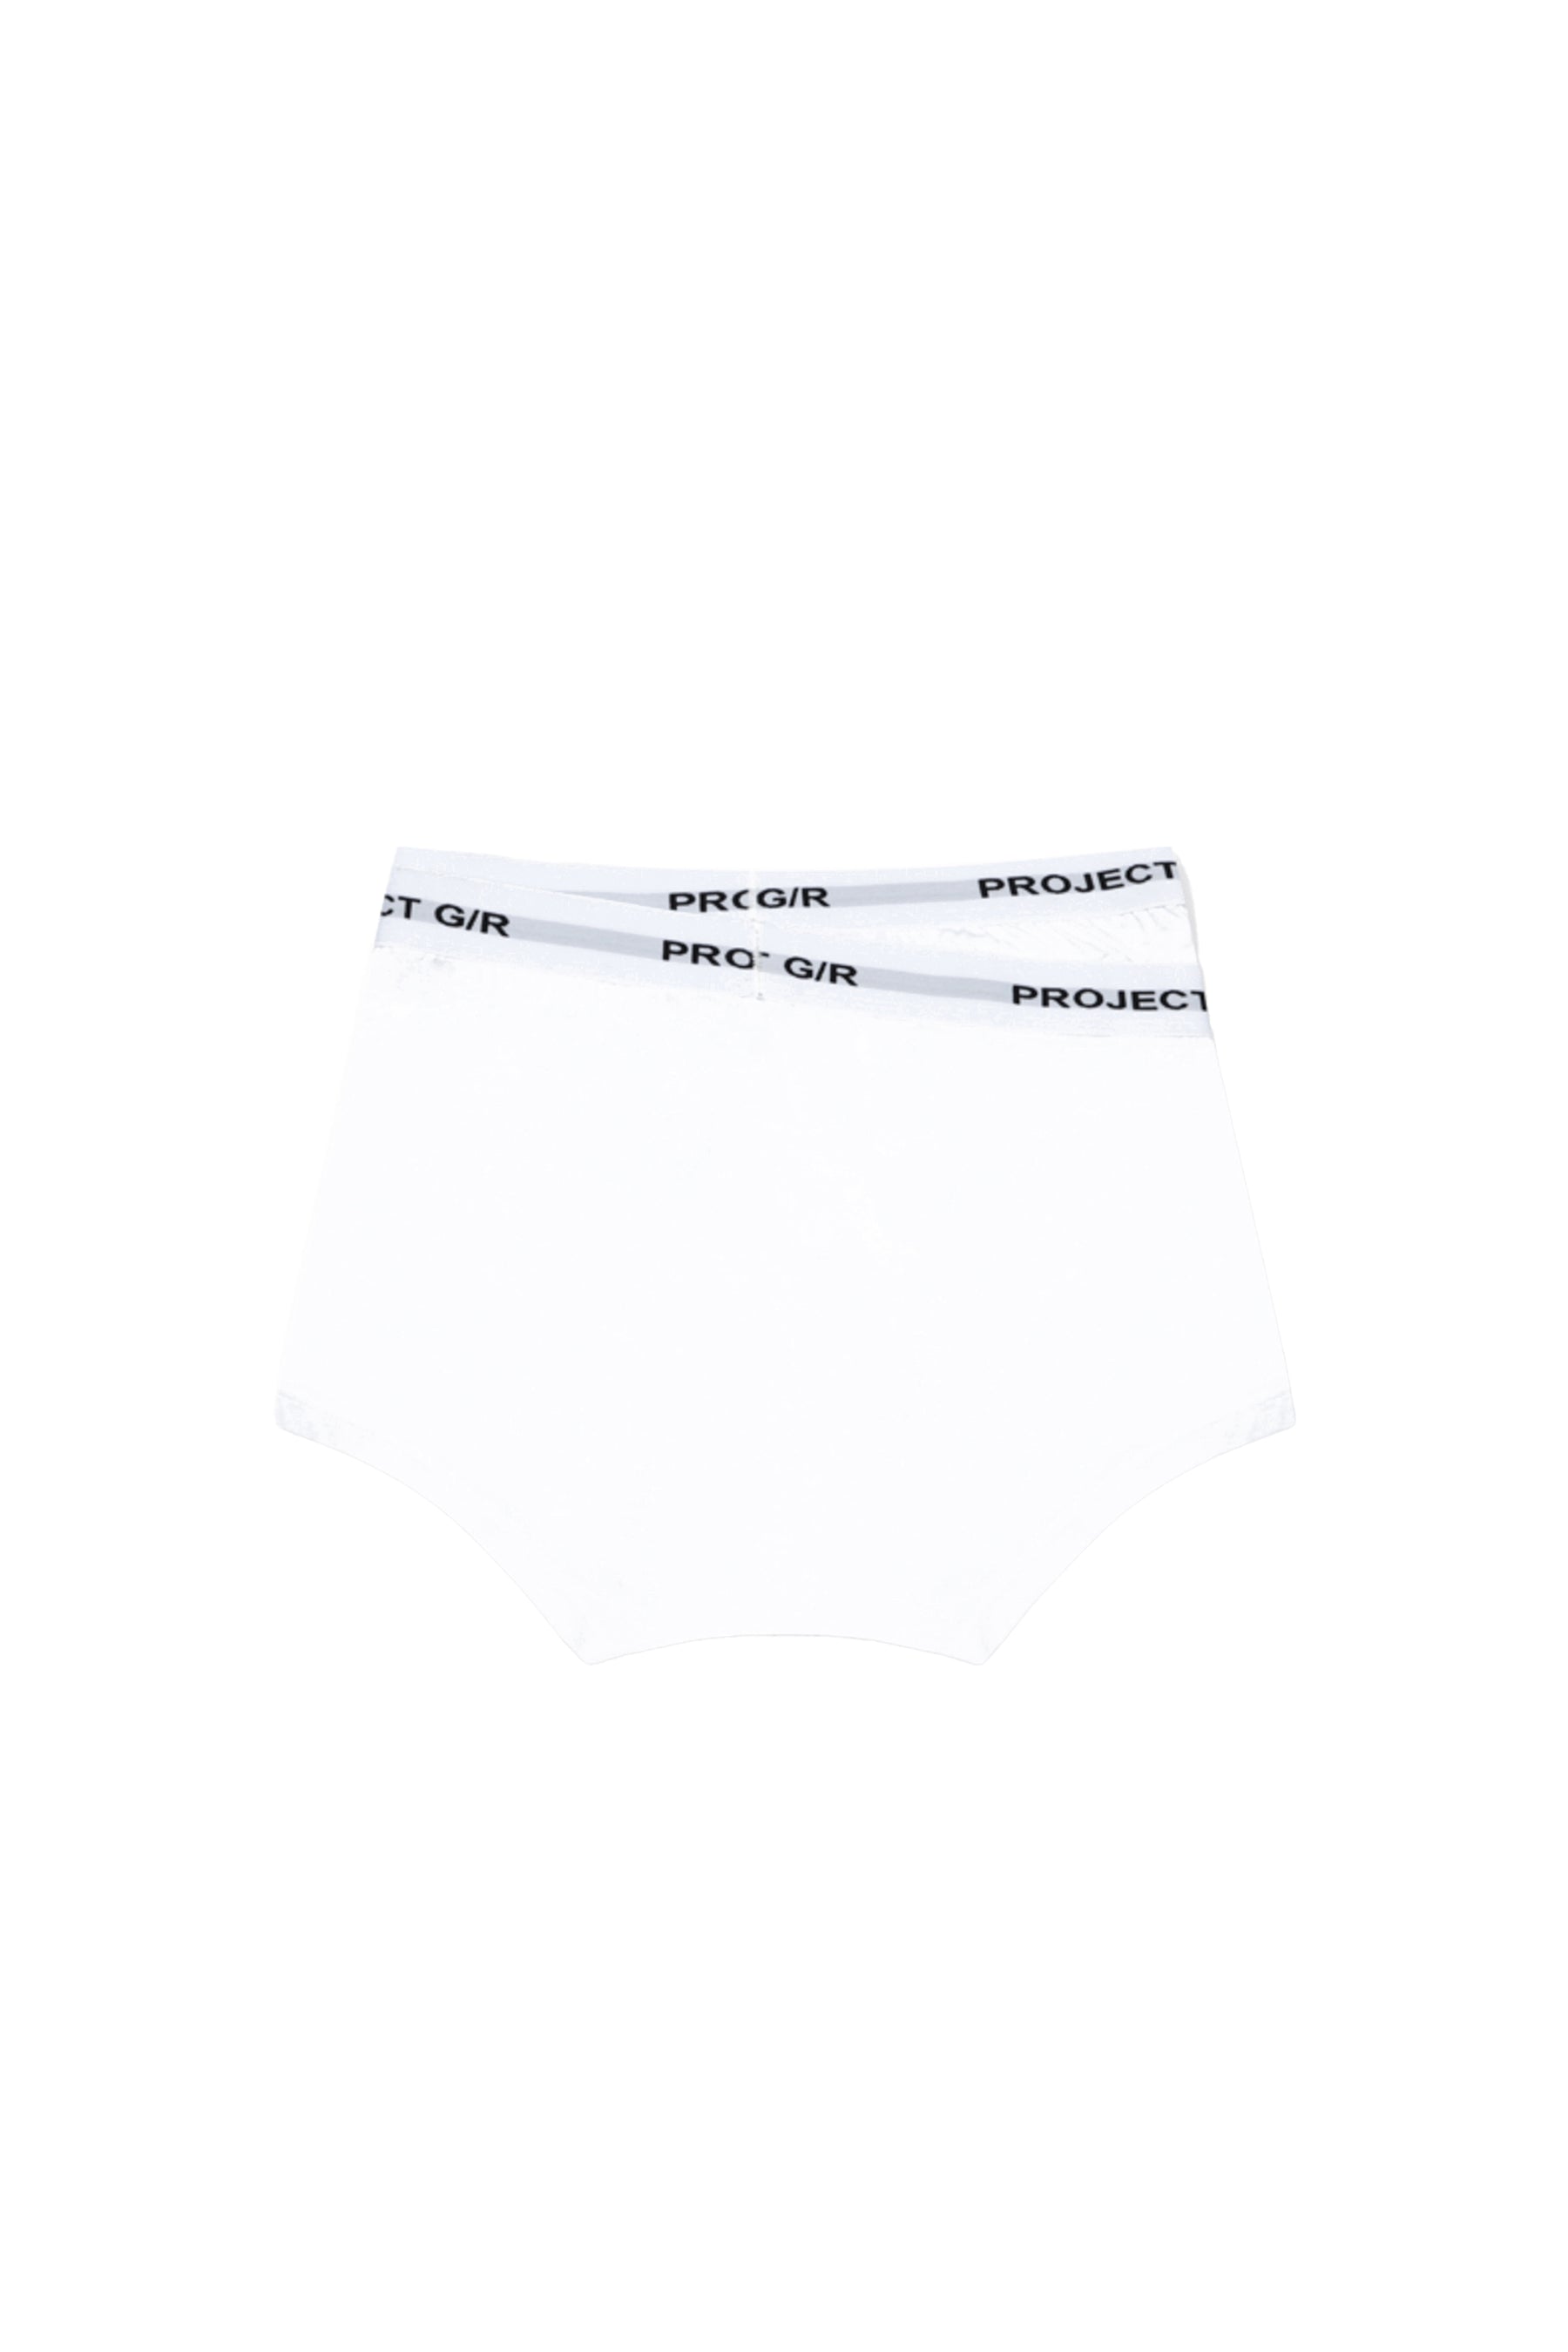 3PACK DOUBLE BAND UNDERWEAR / BK GRY WHT